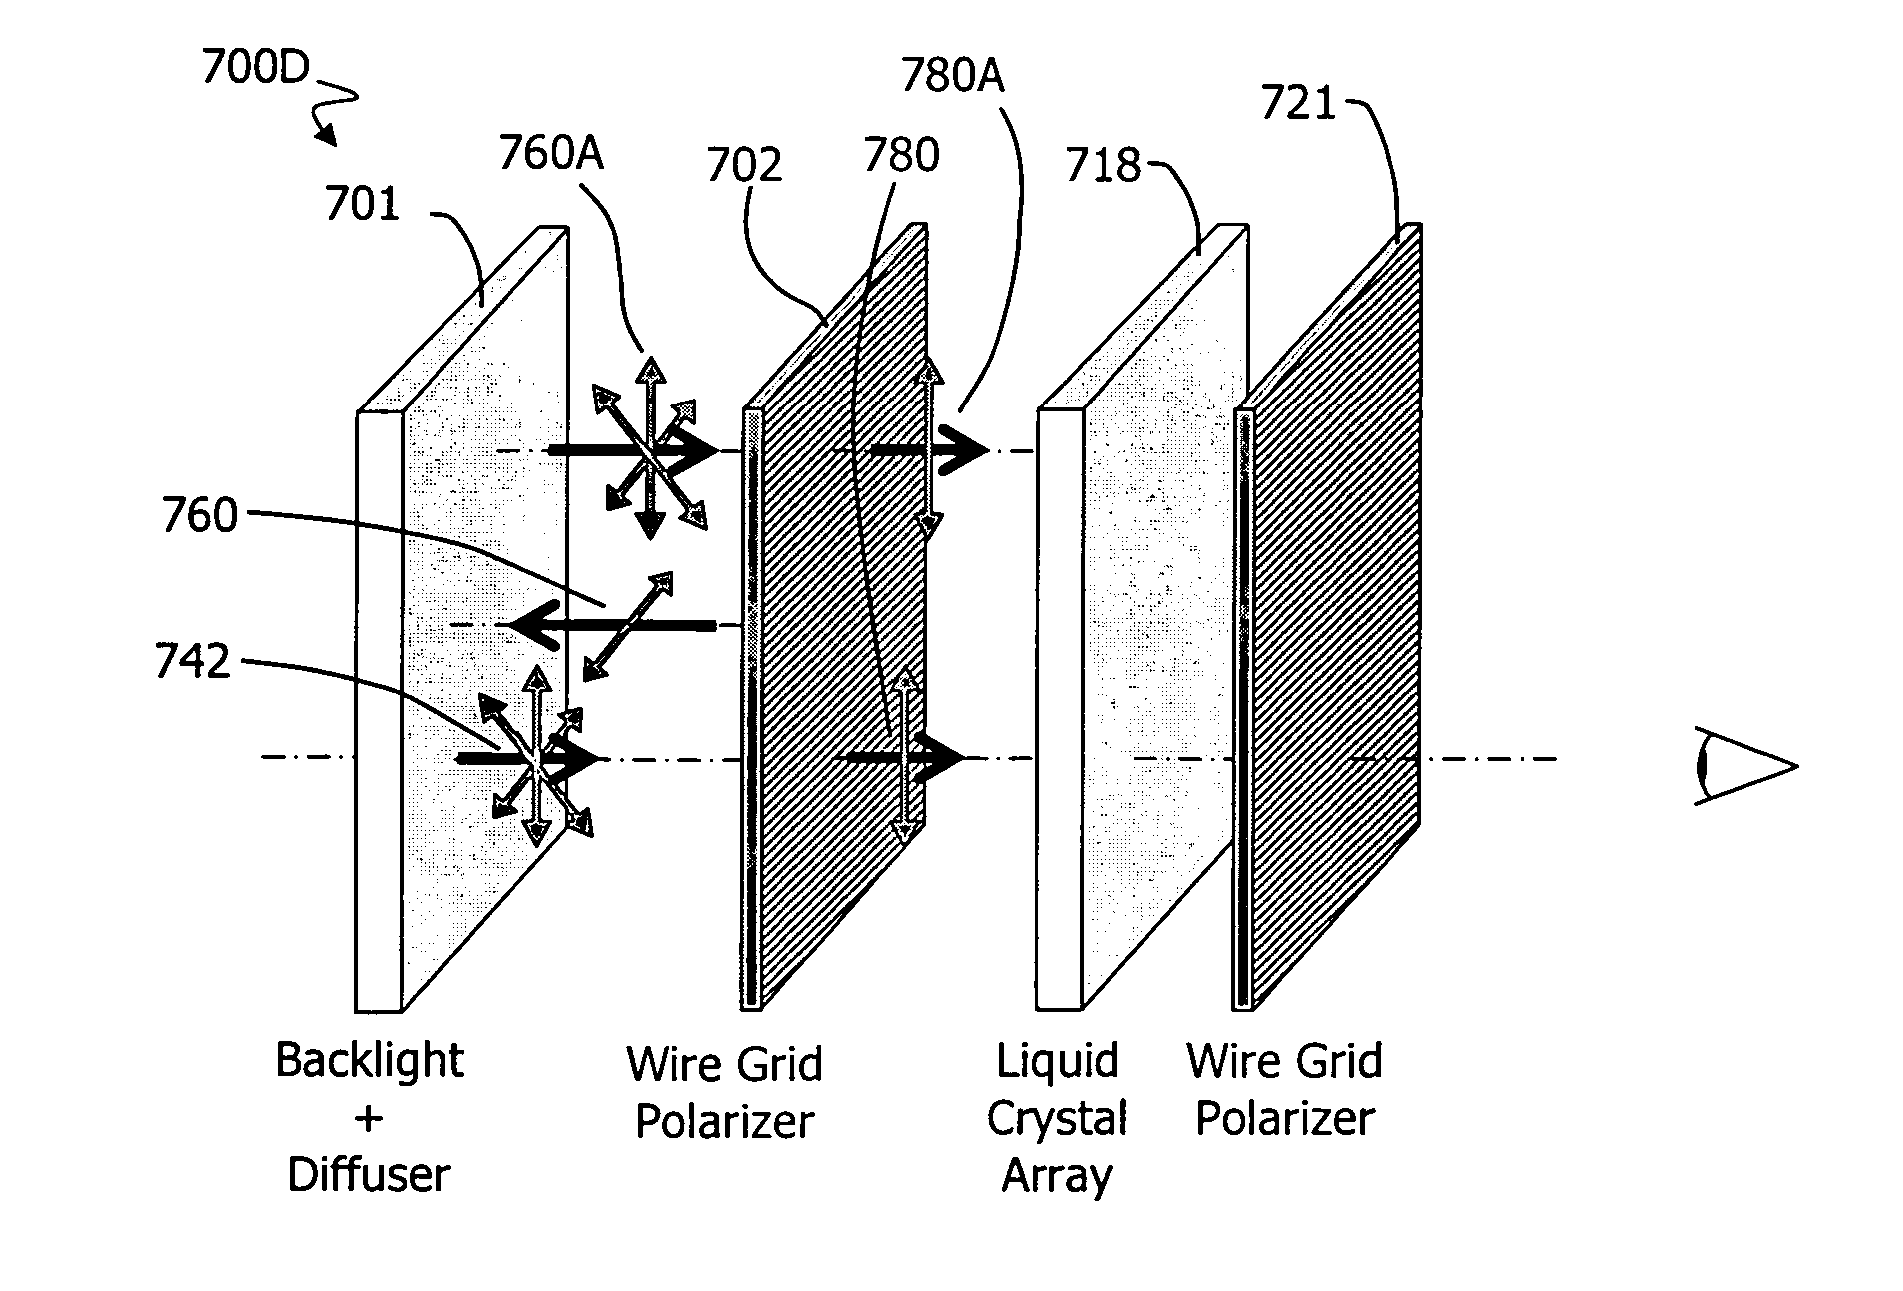 Applications and fabrication techniques for large scale wire grid polarizers